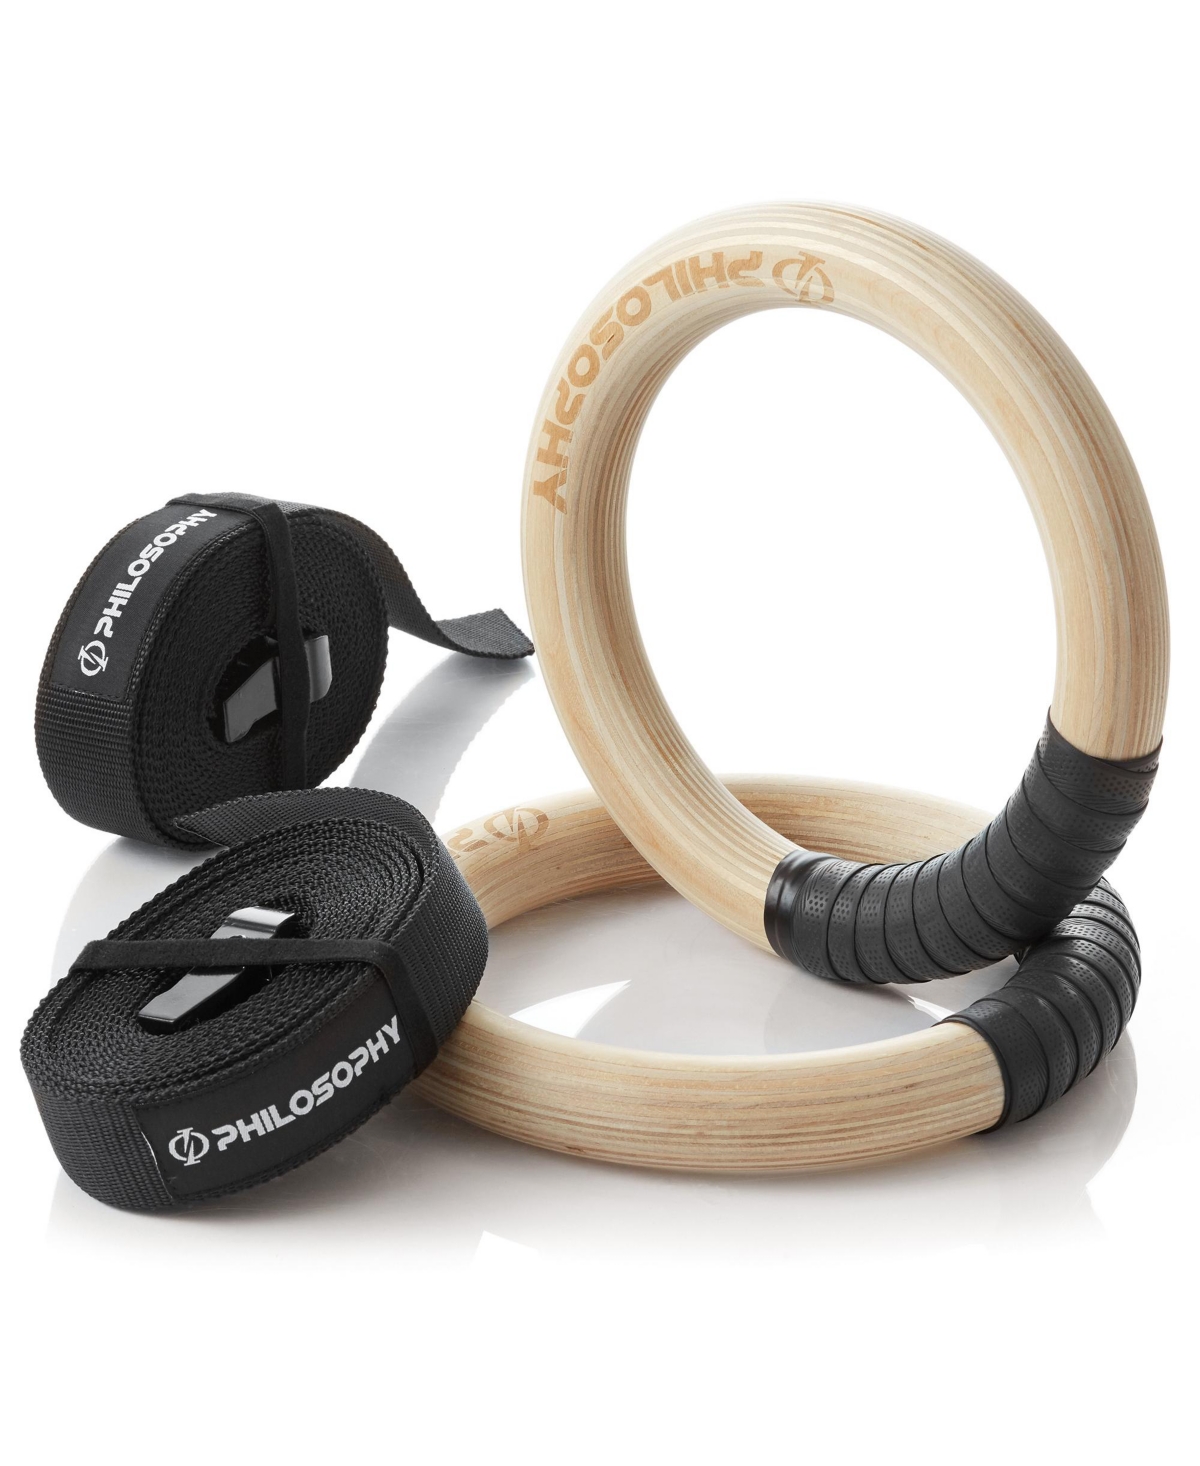 Wood Gymnastic Rings 1.25" Grip - Exercise Ring Set with Adjustable Straps, Grip Tape for Pull Ups, Dips, Muscle Ups - Wood